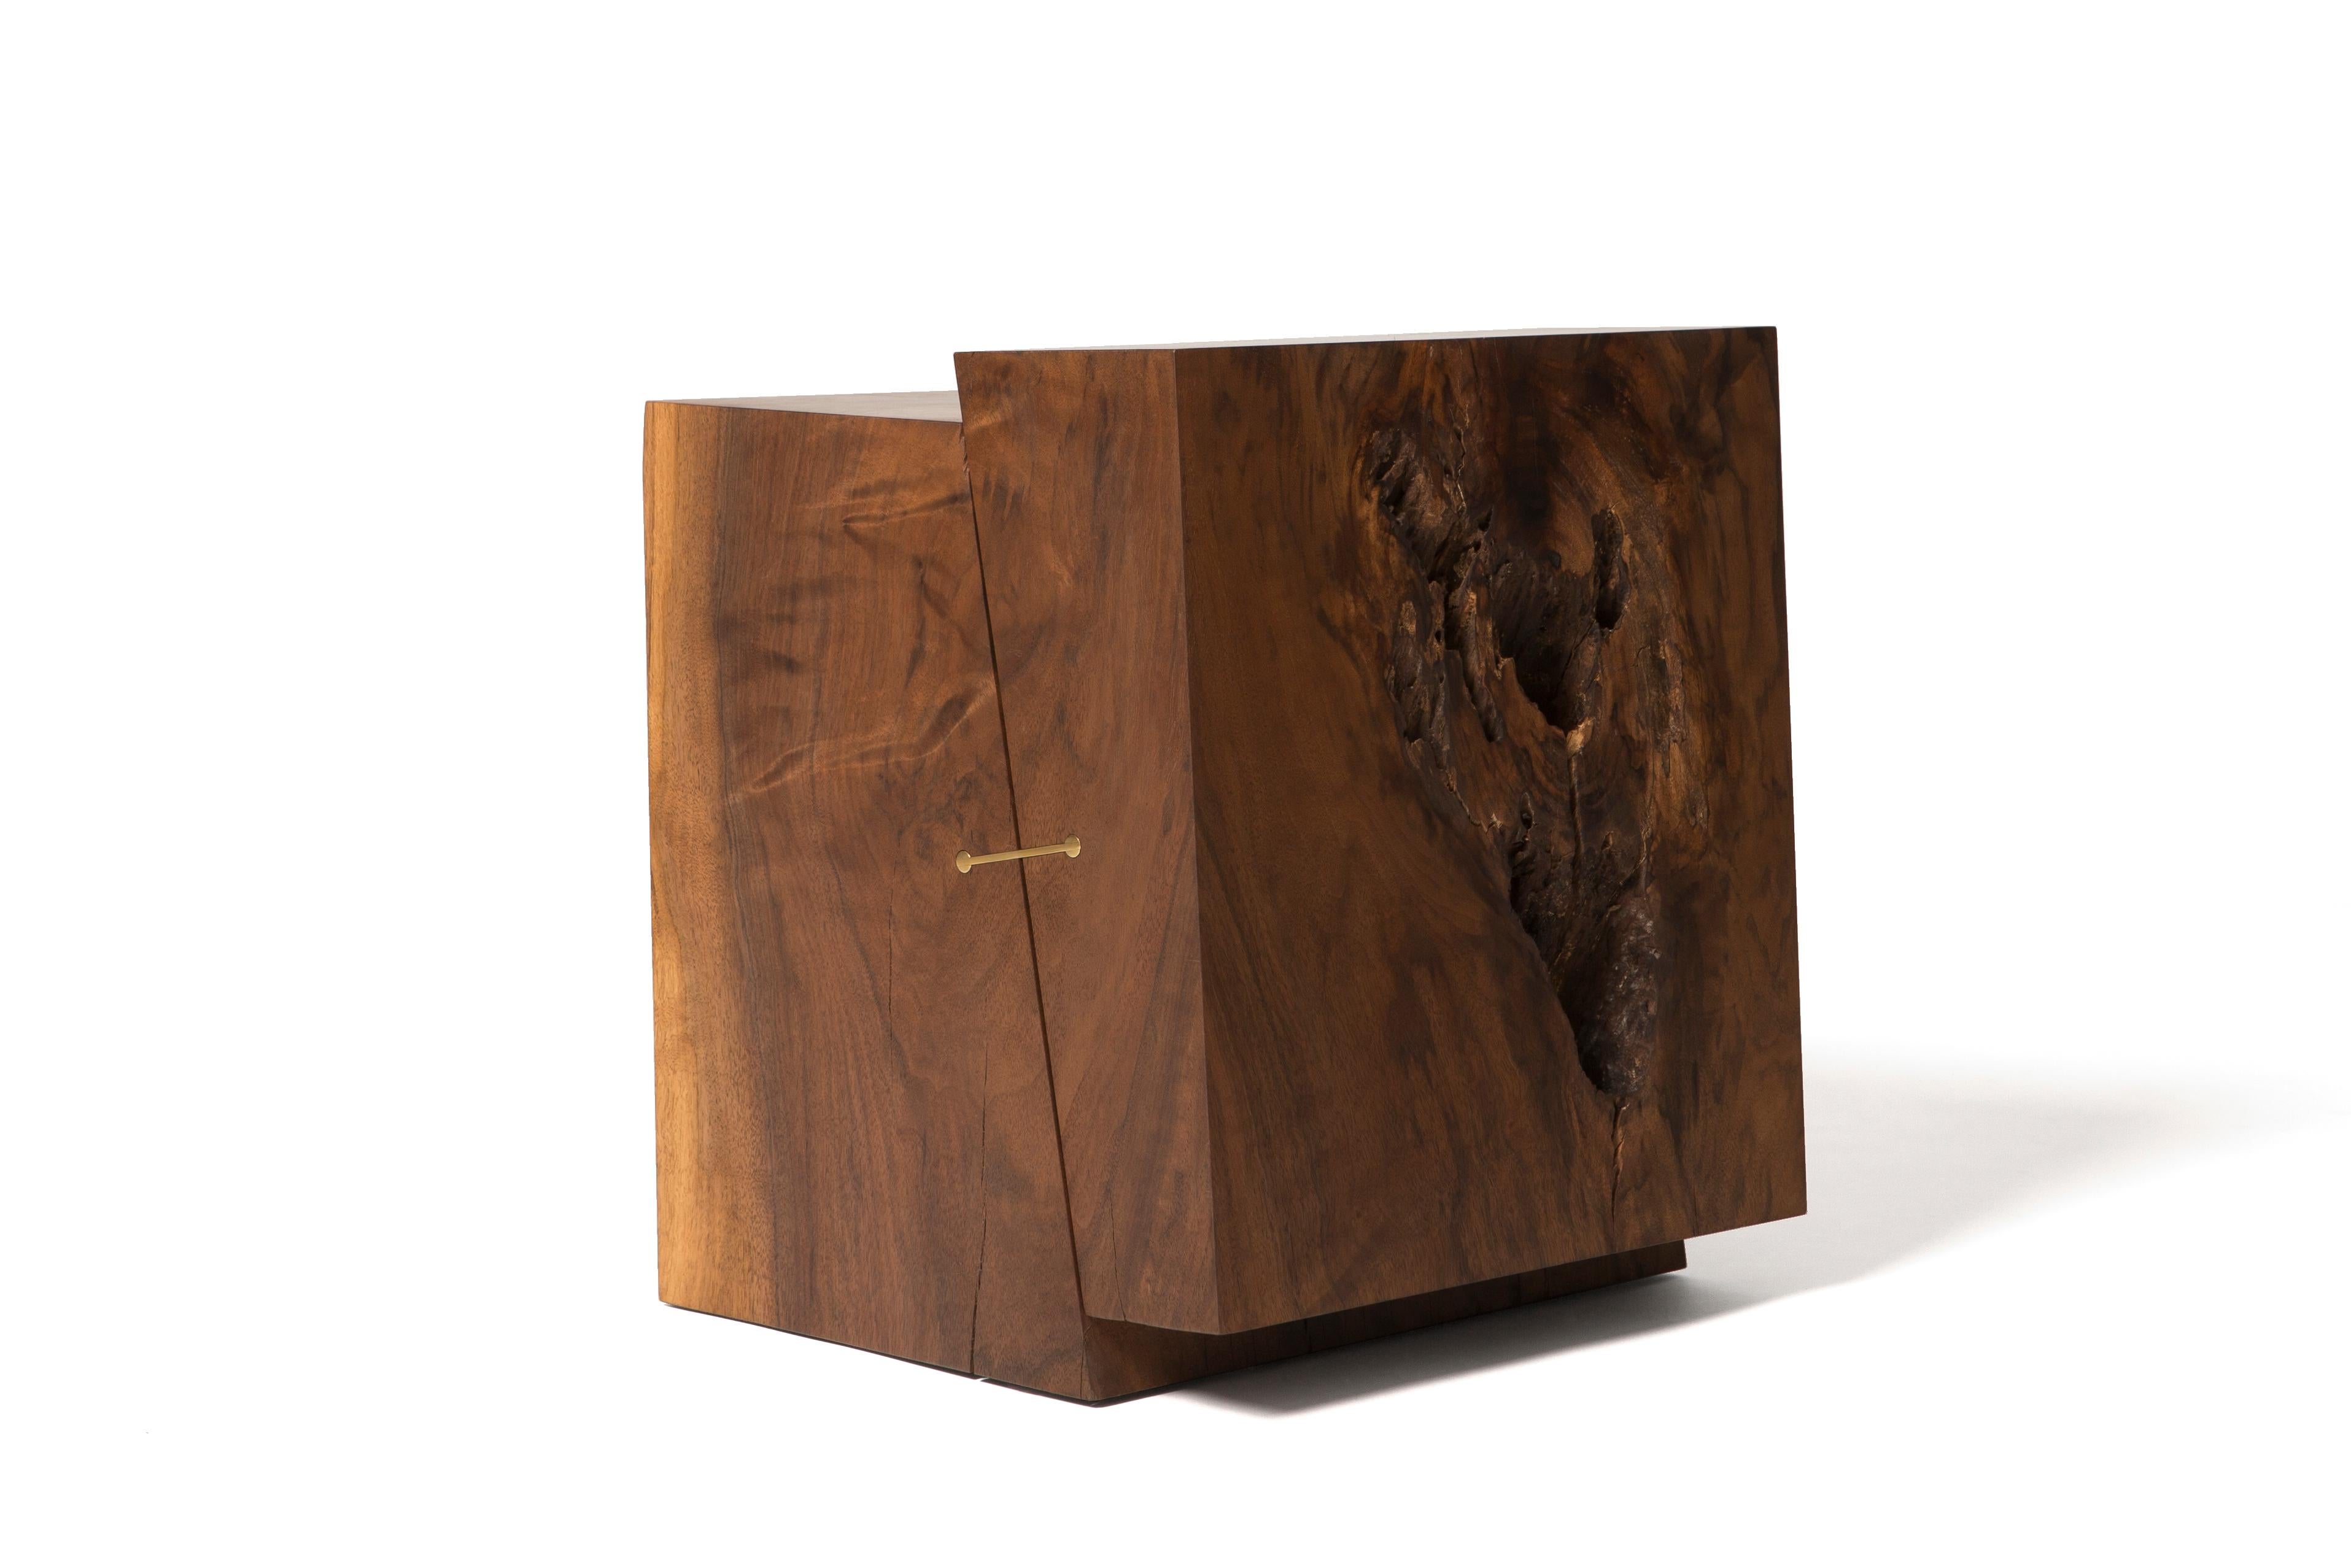 Sawn from beams of solid California Walnut, these constructivist styled Strike/Slip earthquake inspired building blocks by Taylor Donsker are versatile. Hand finished on all sides, these blocks can be rotated and/or flipped onto all sides to reveal